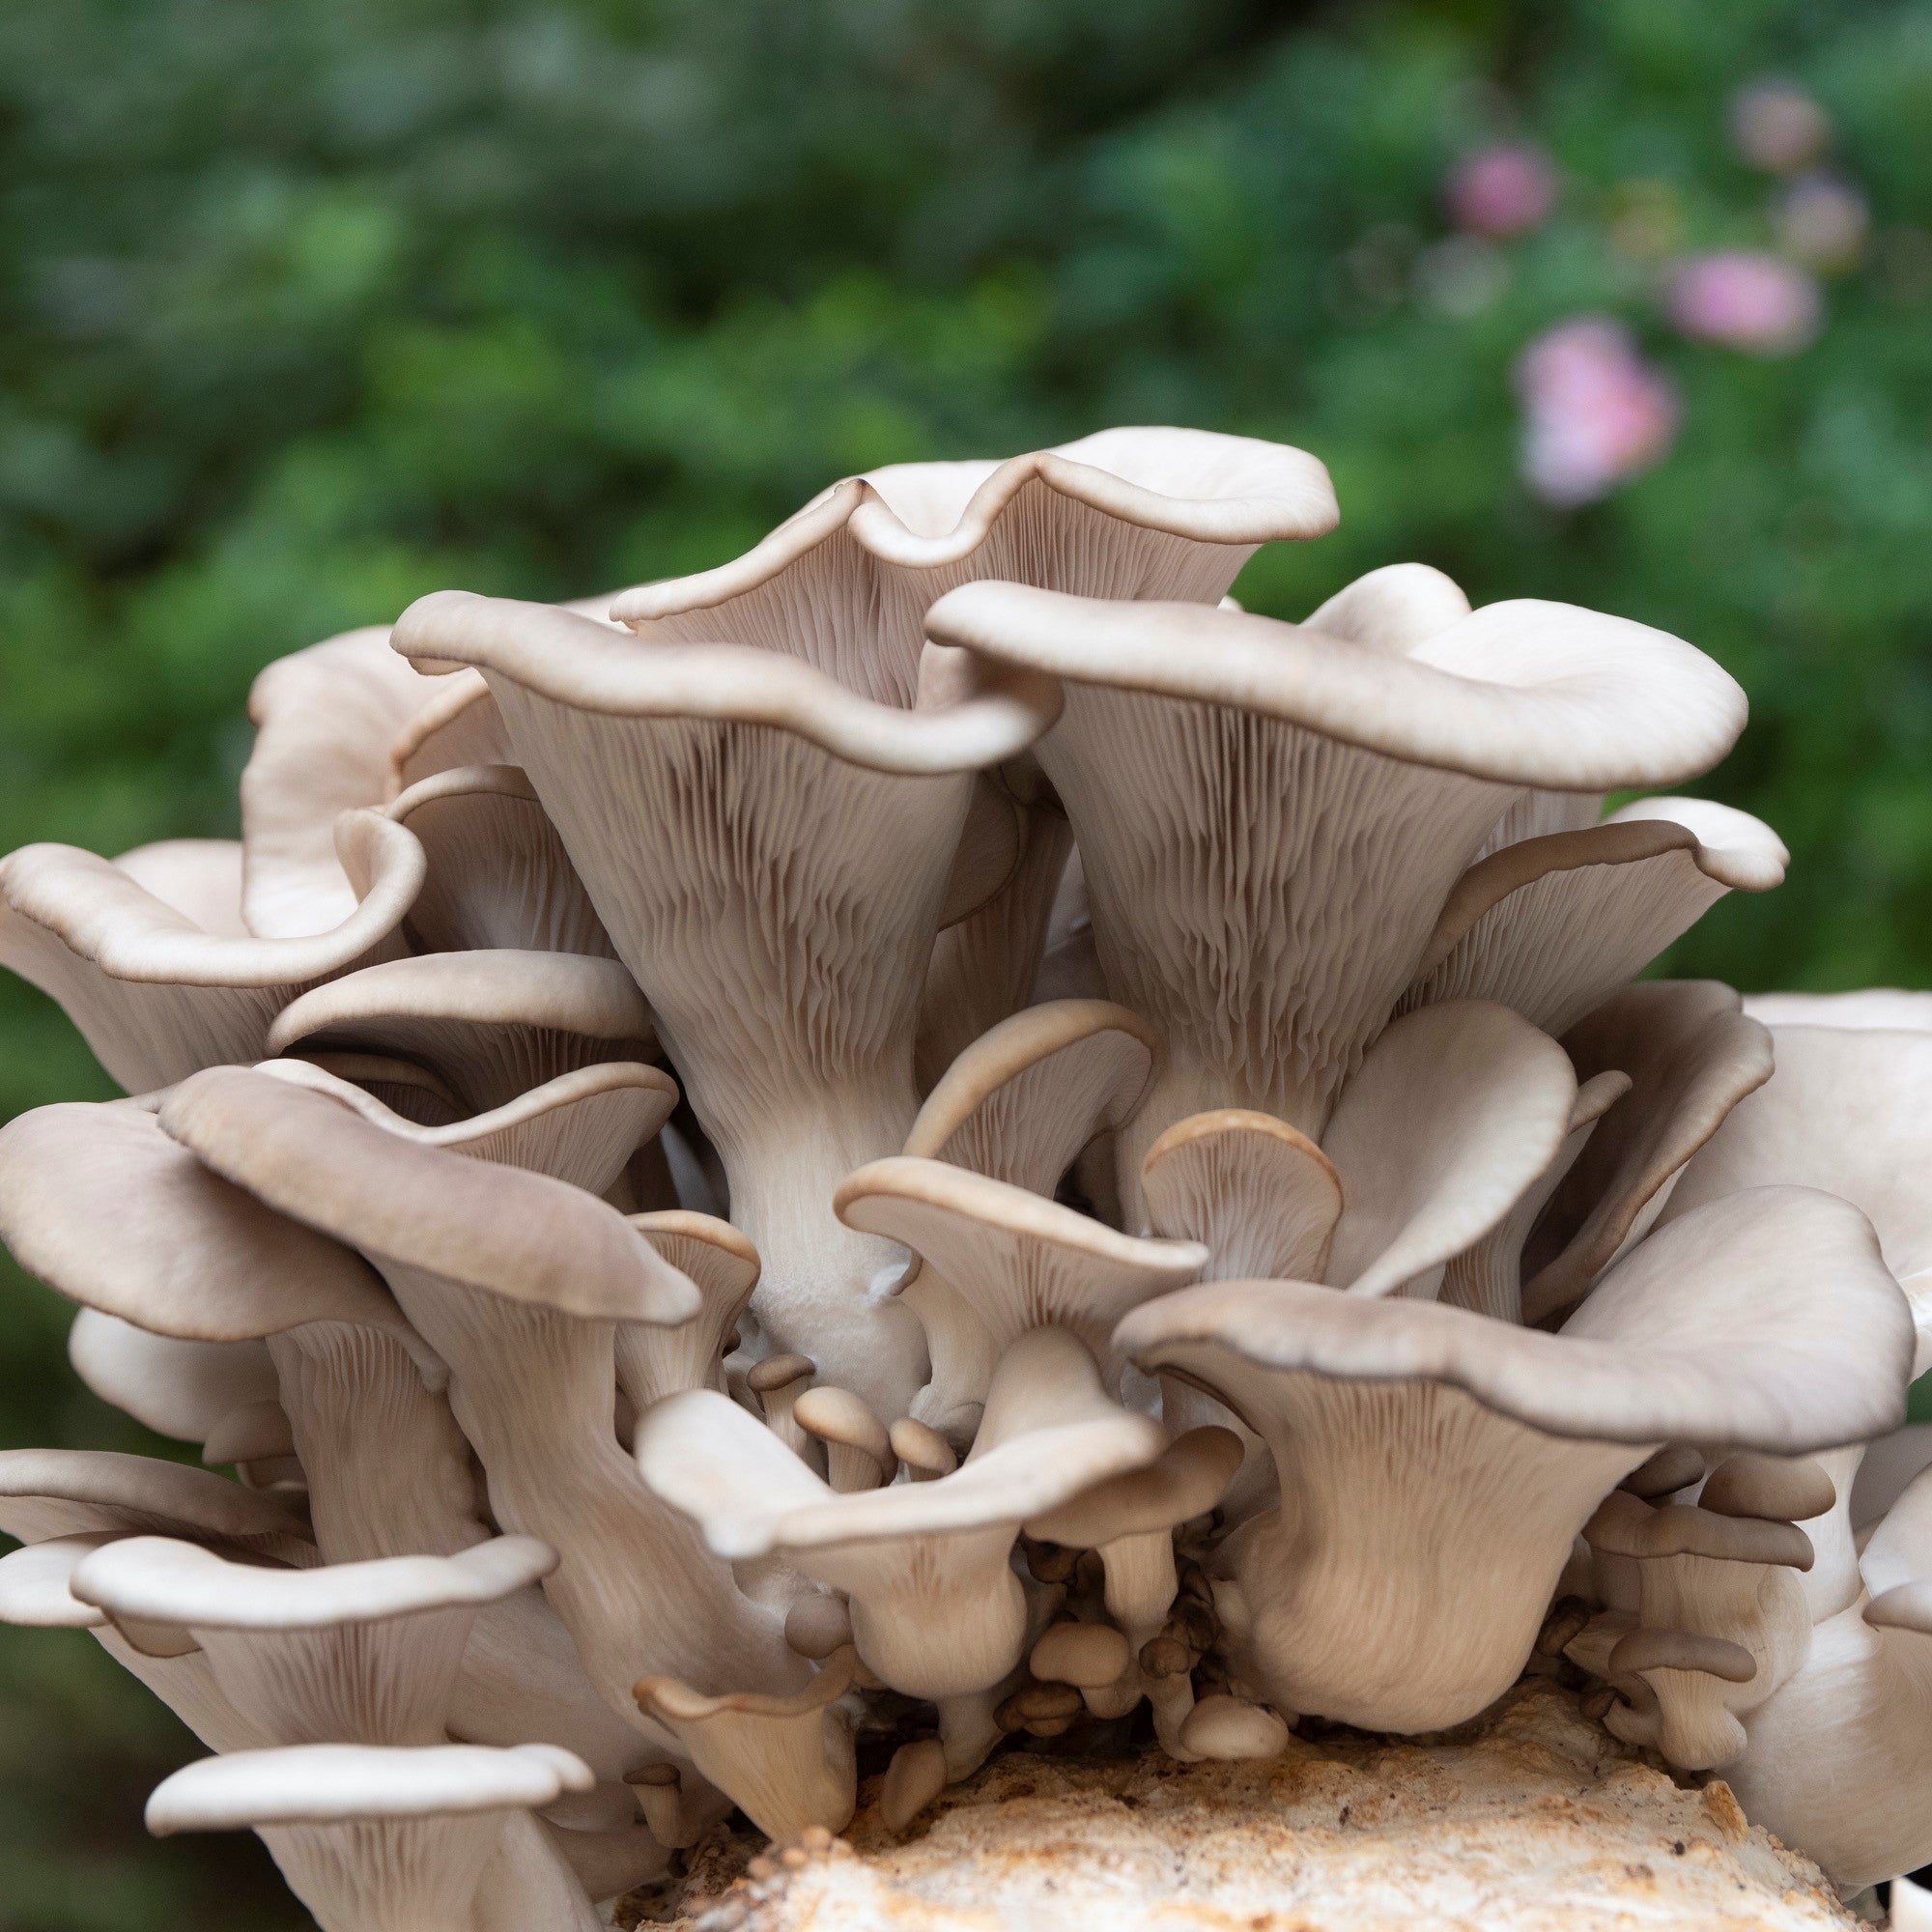 6 Ways to Give Thanks for Mushrooms